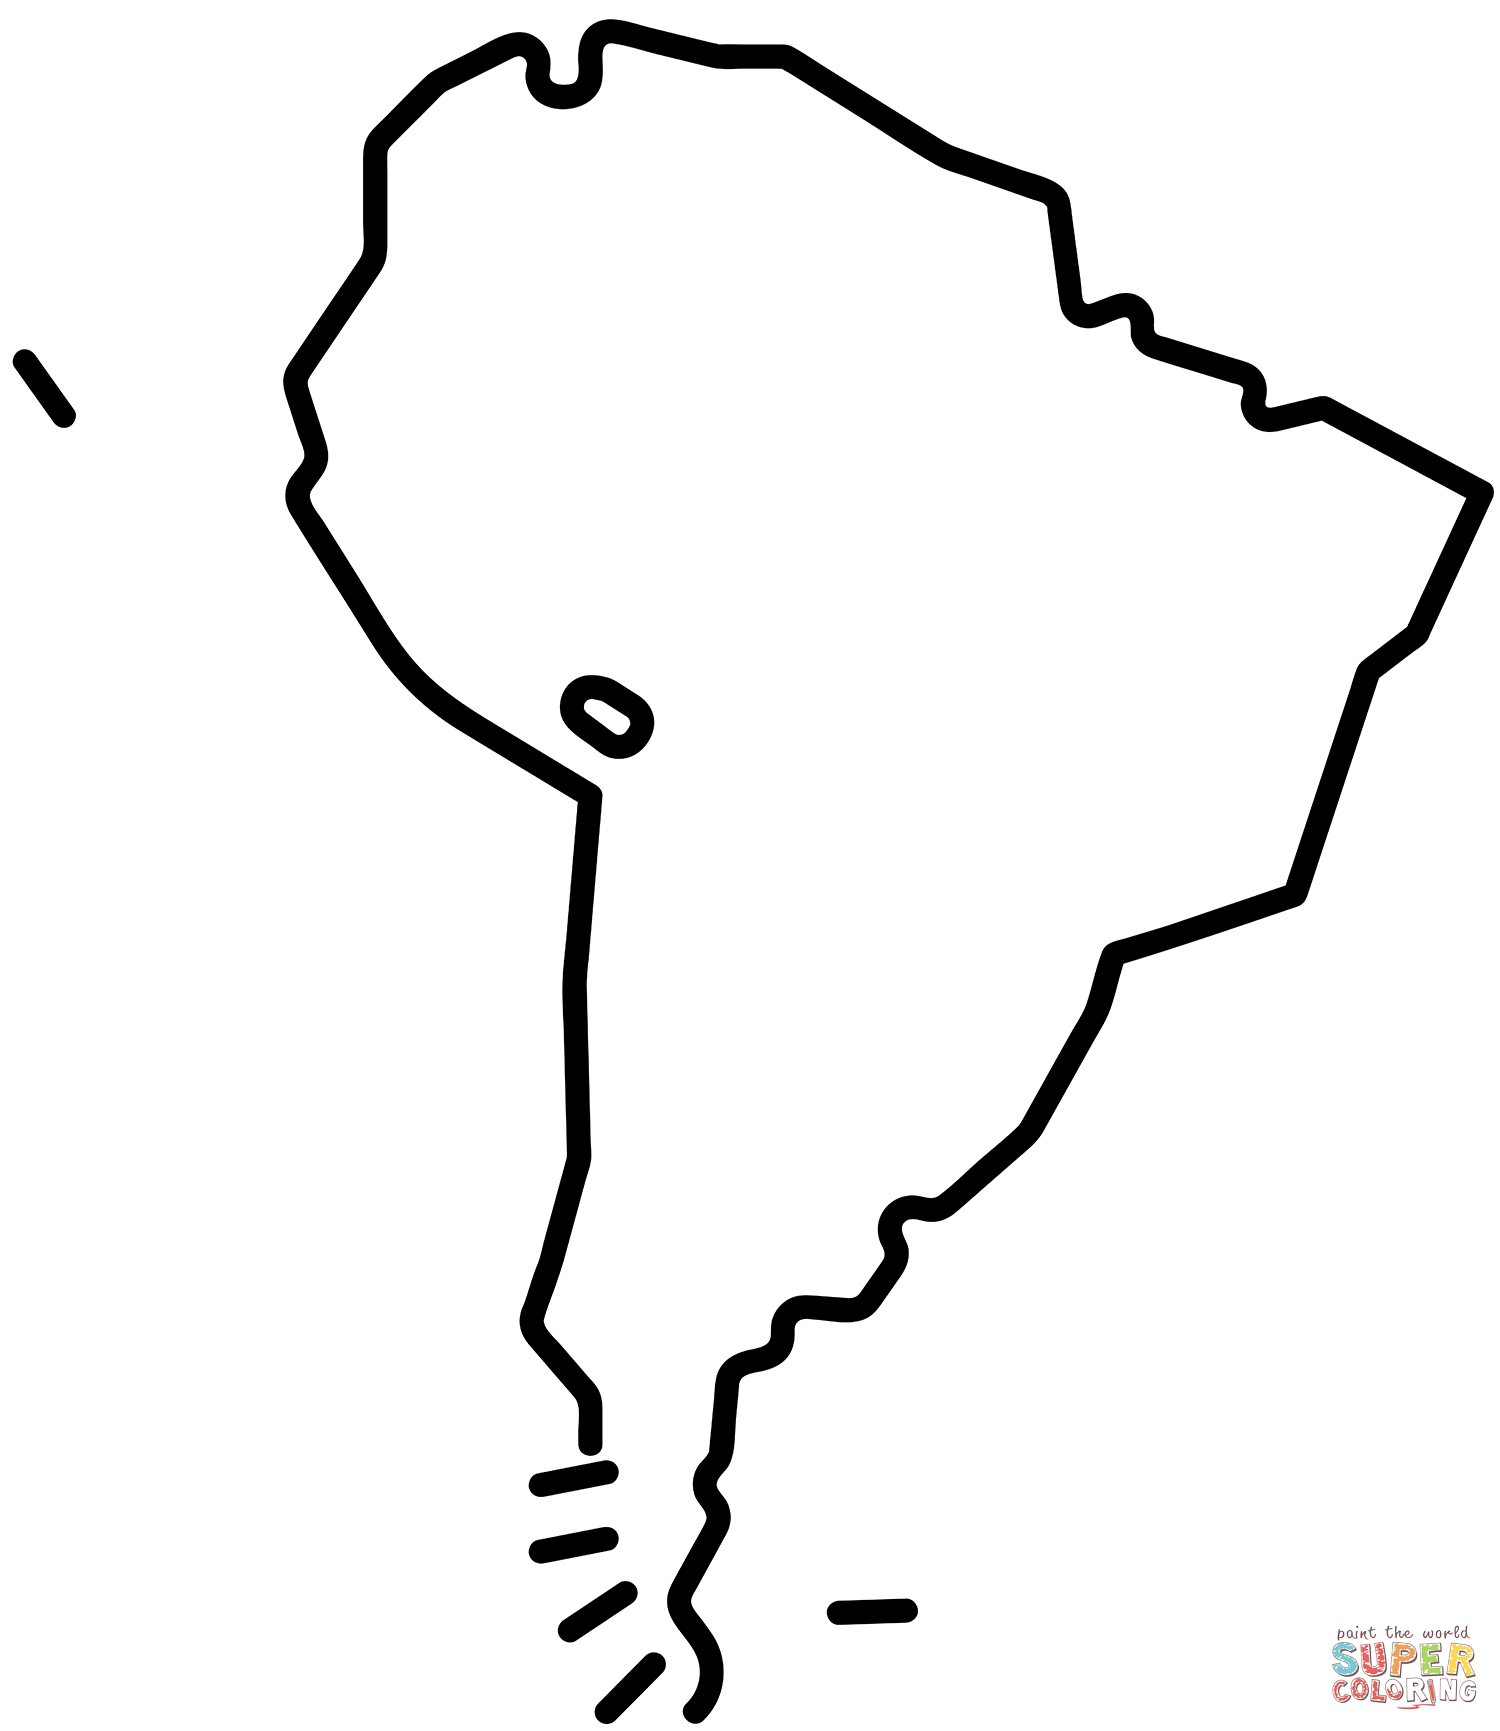 South america map coloring page free printable coloring pages